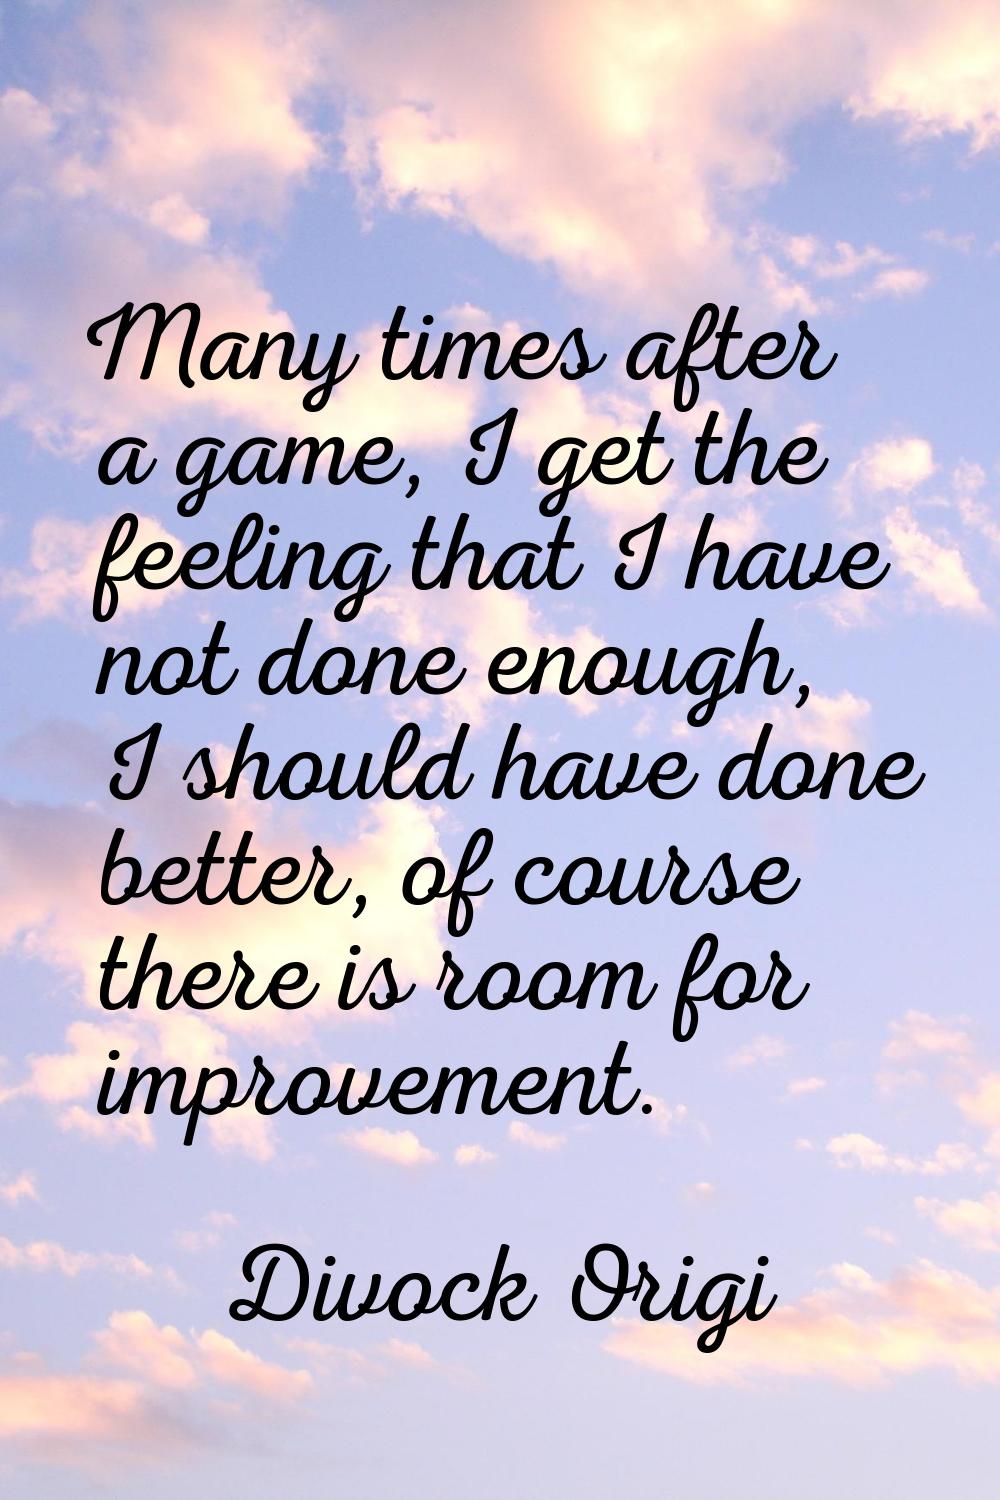 Many times after a game, I get the feeling that I have not done enough, I should have done better, 